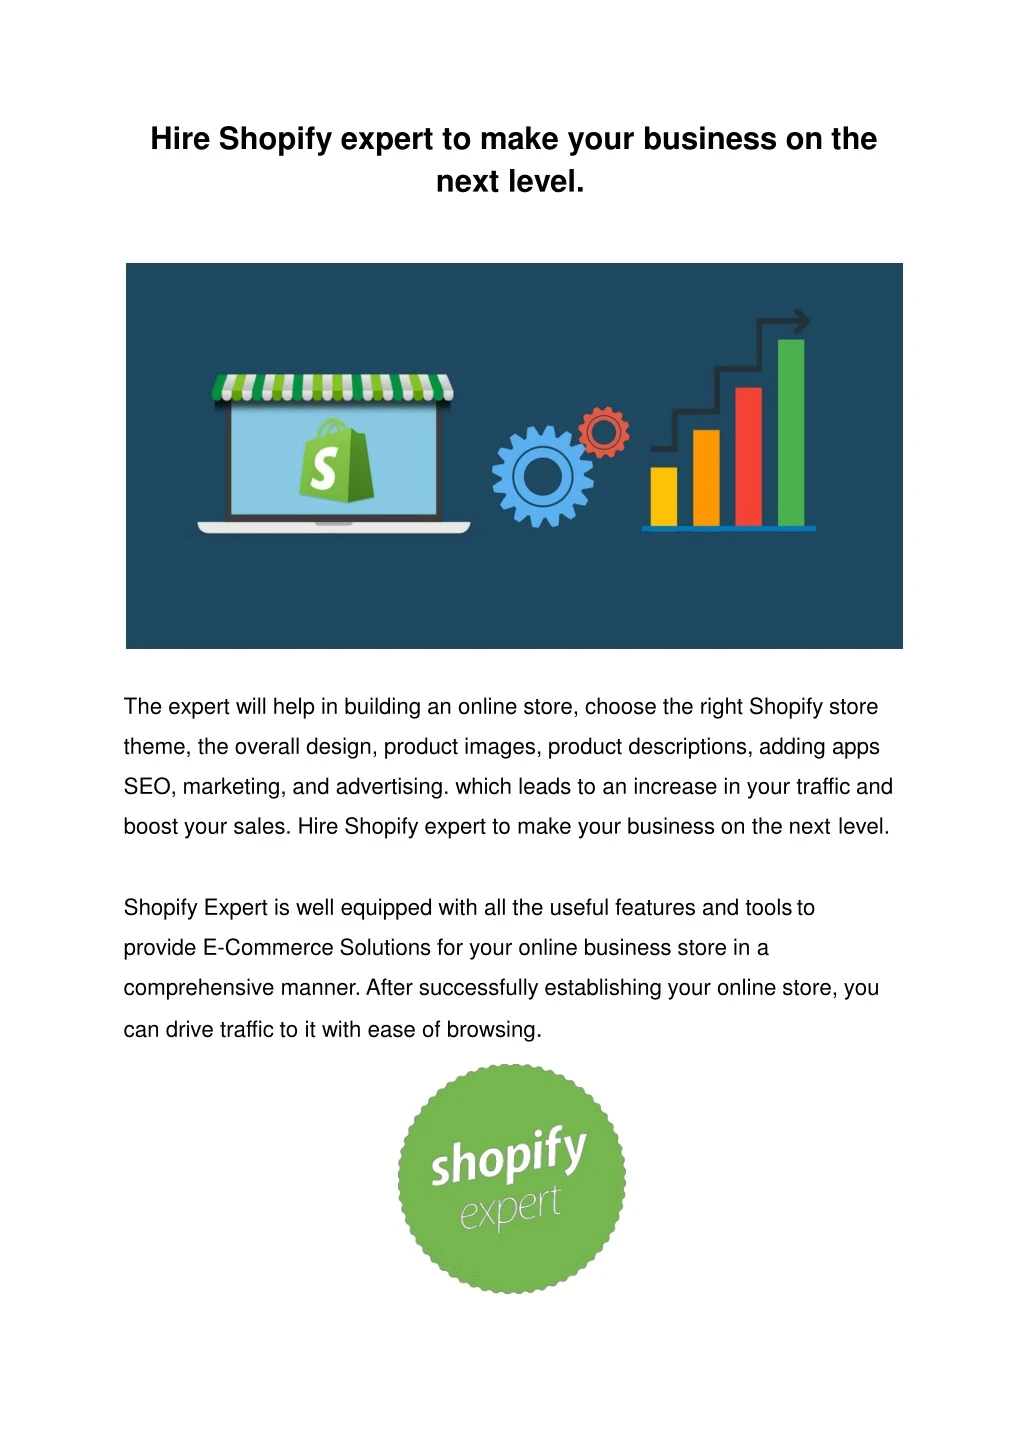 hire shopify expert to make your business